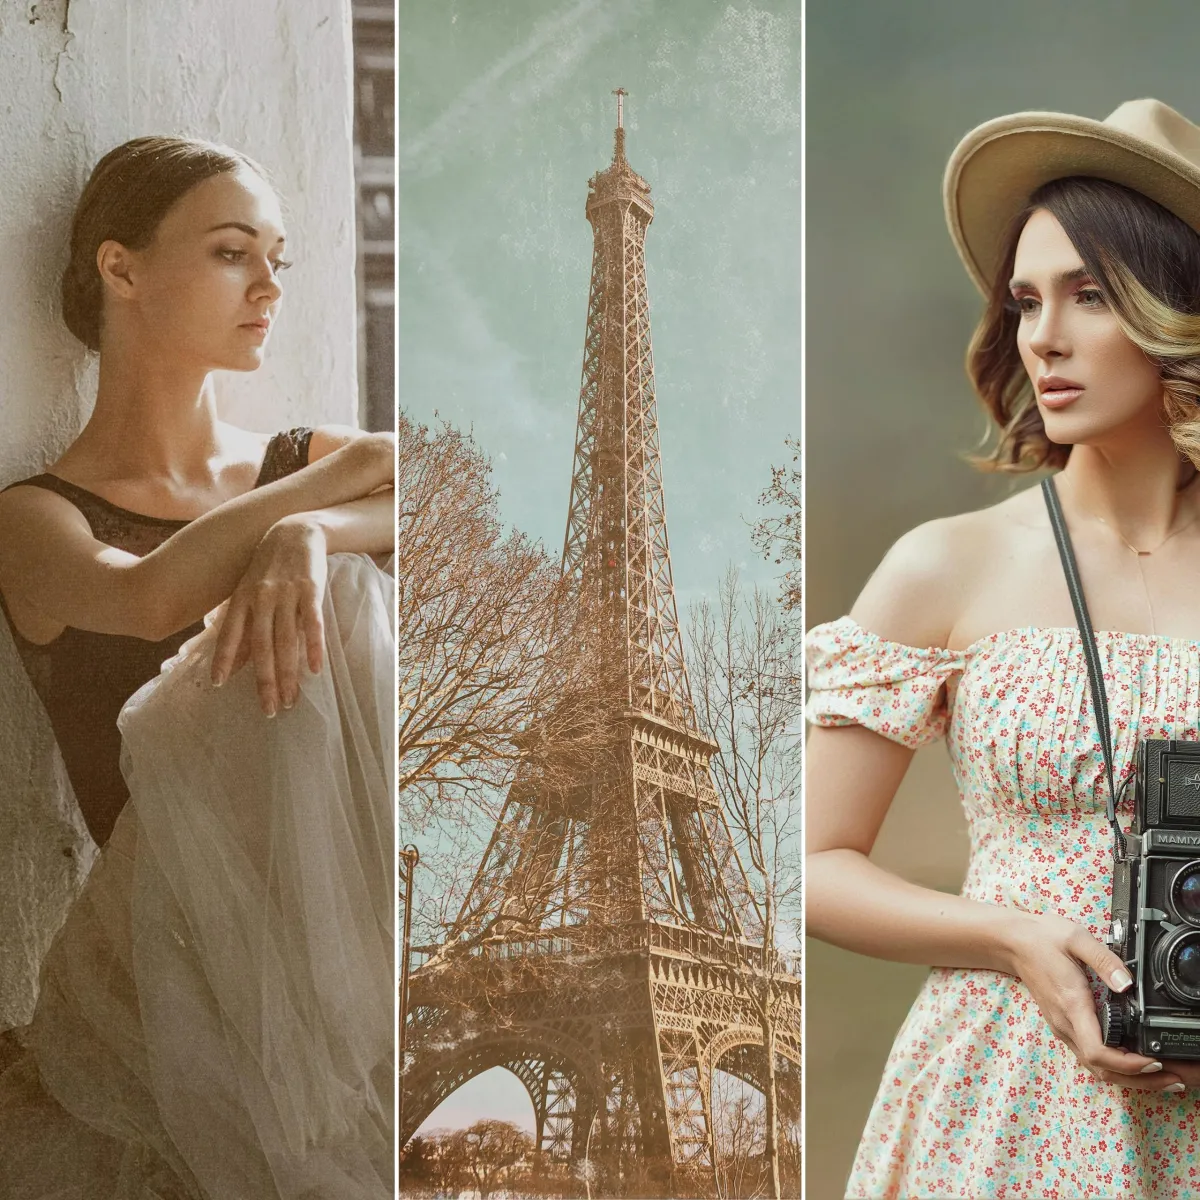 create a vintage effect by adding texture to an image in photoshop